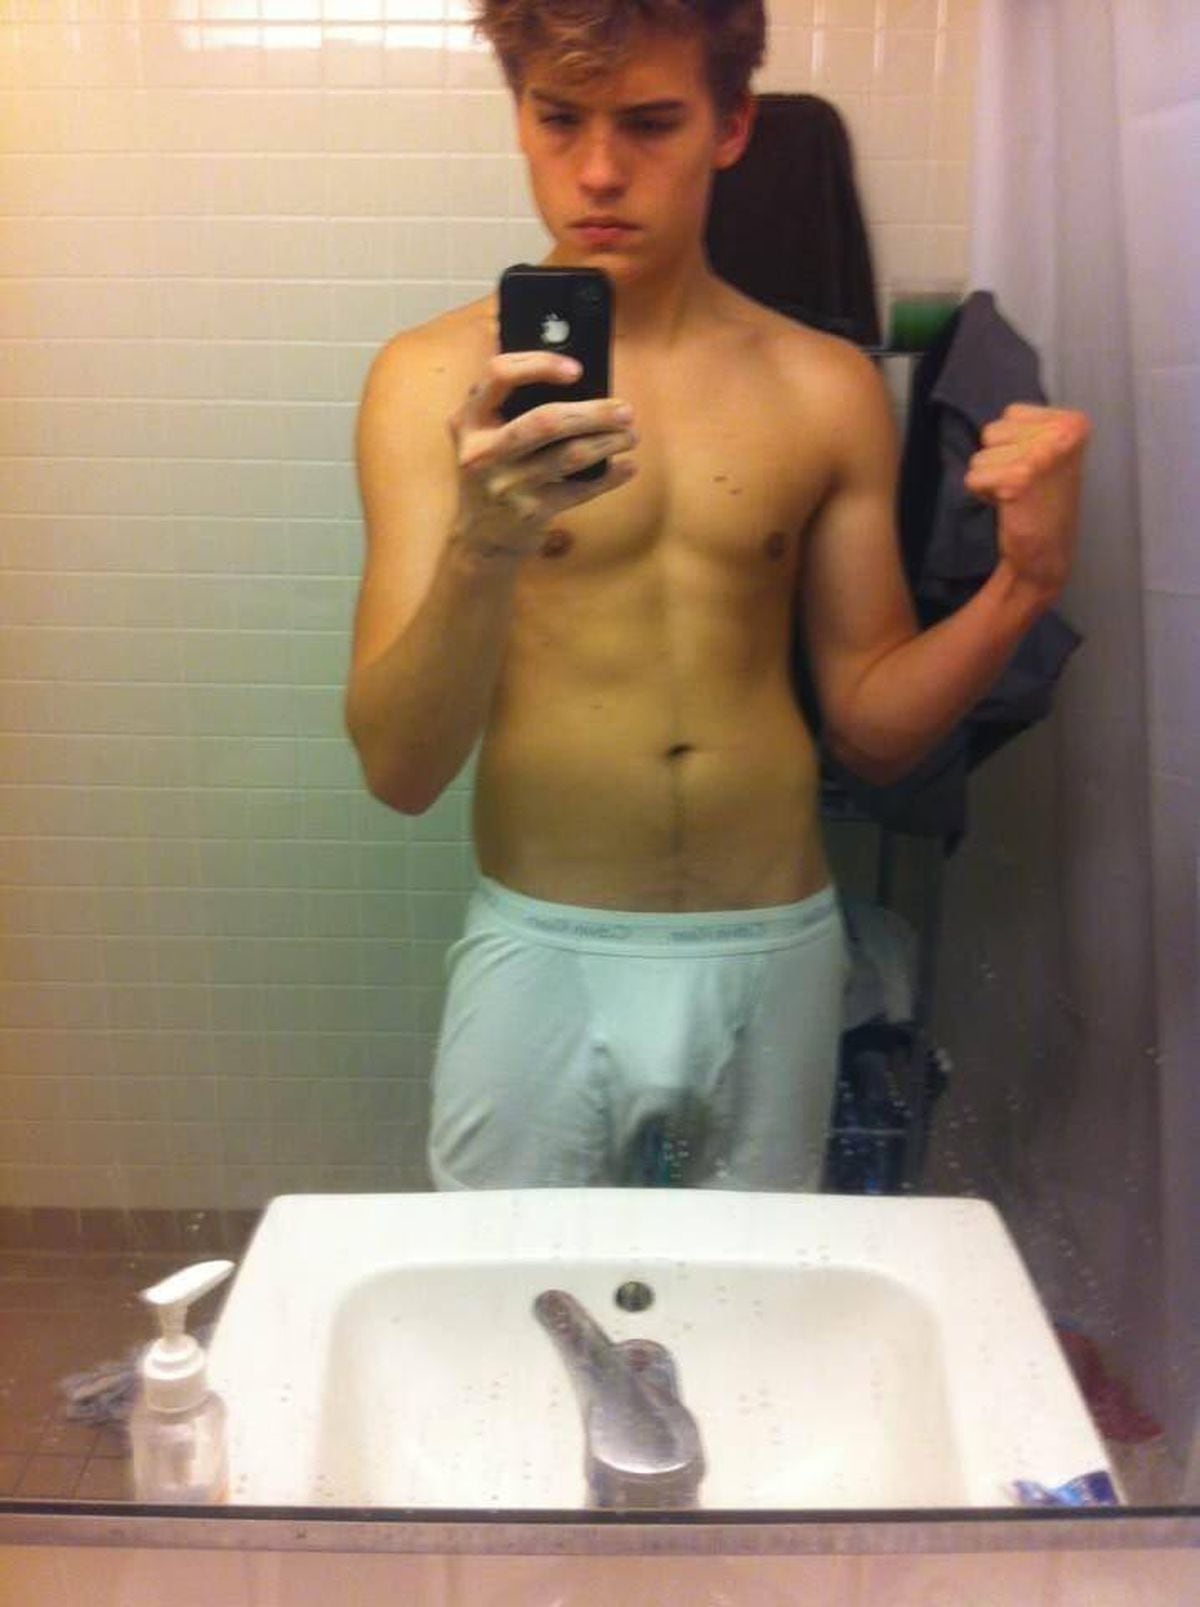 Now Trending: Disney star Dylan Sprouse’s nude selfie lands on Twitter, and...